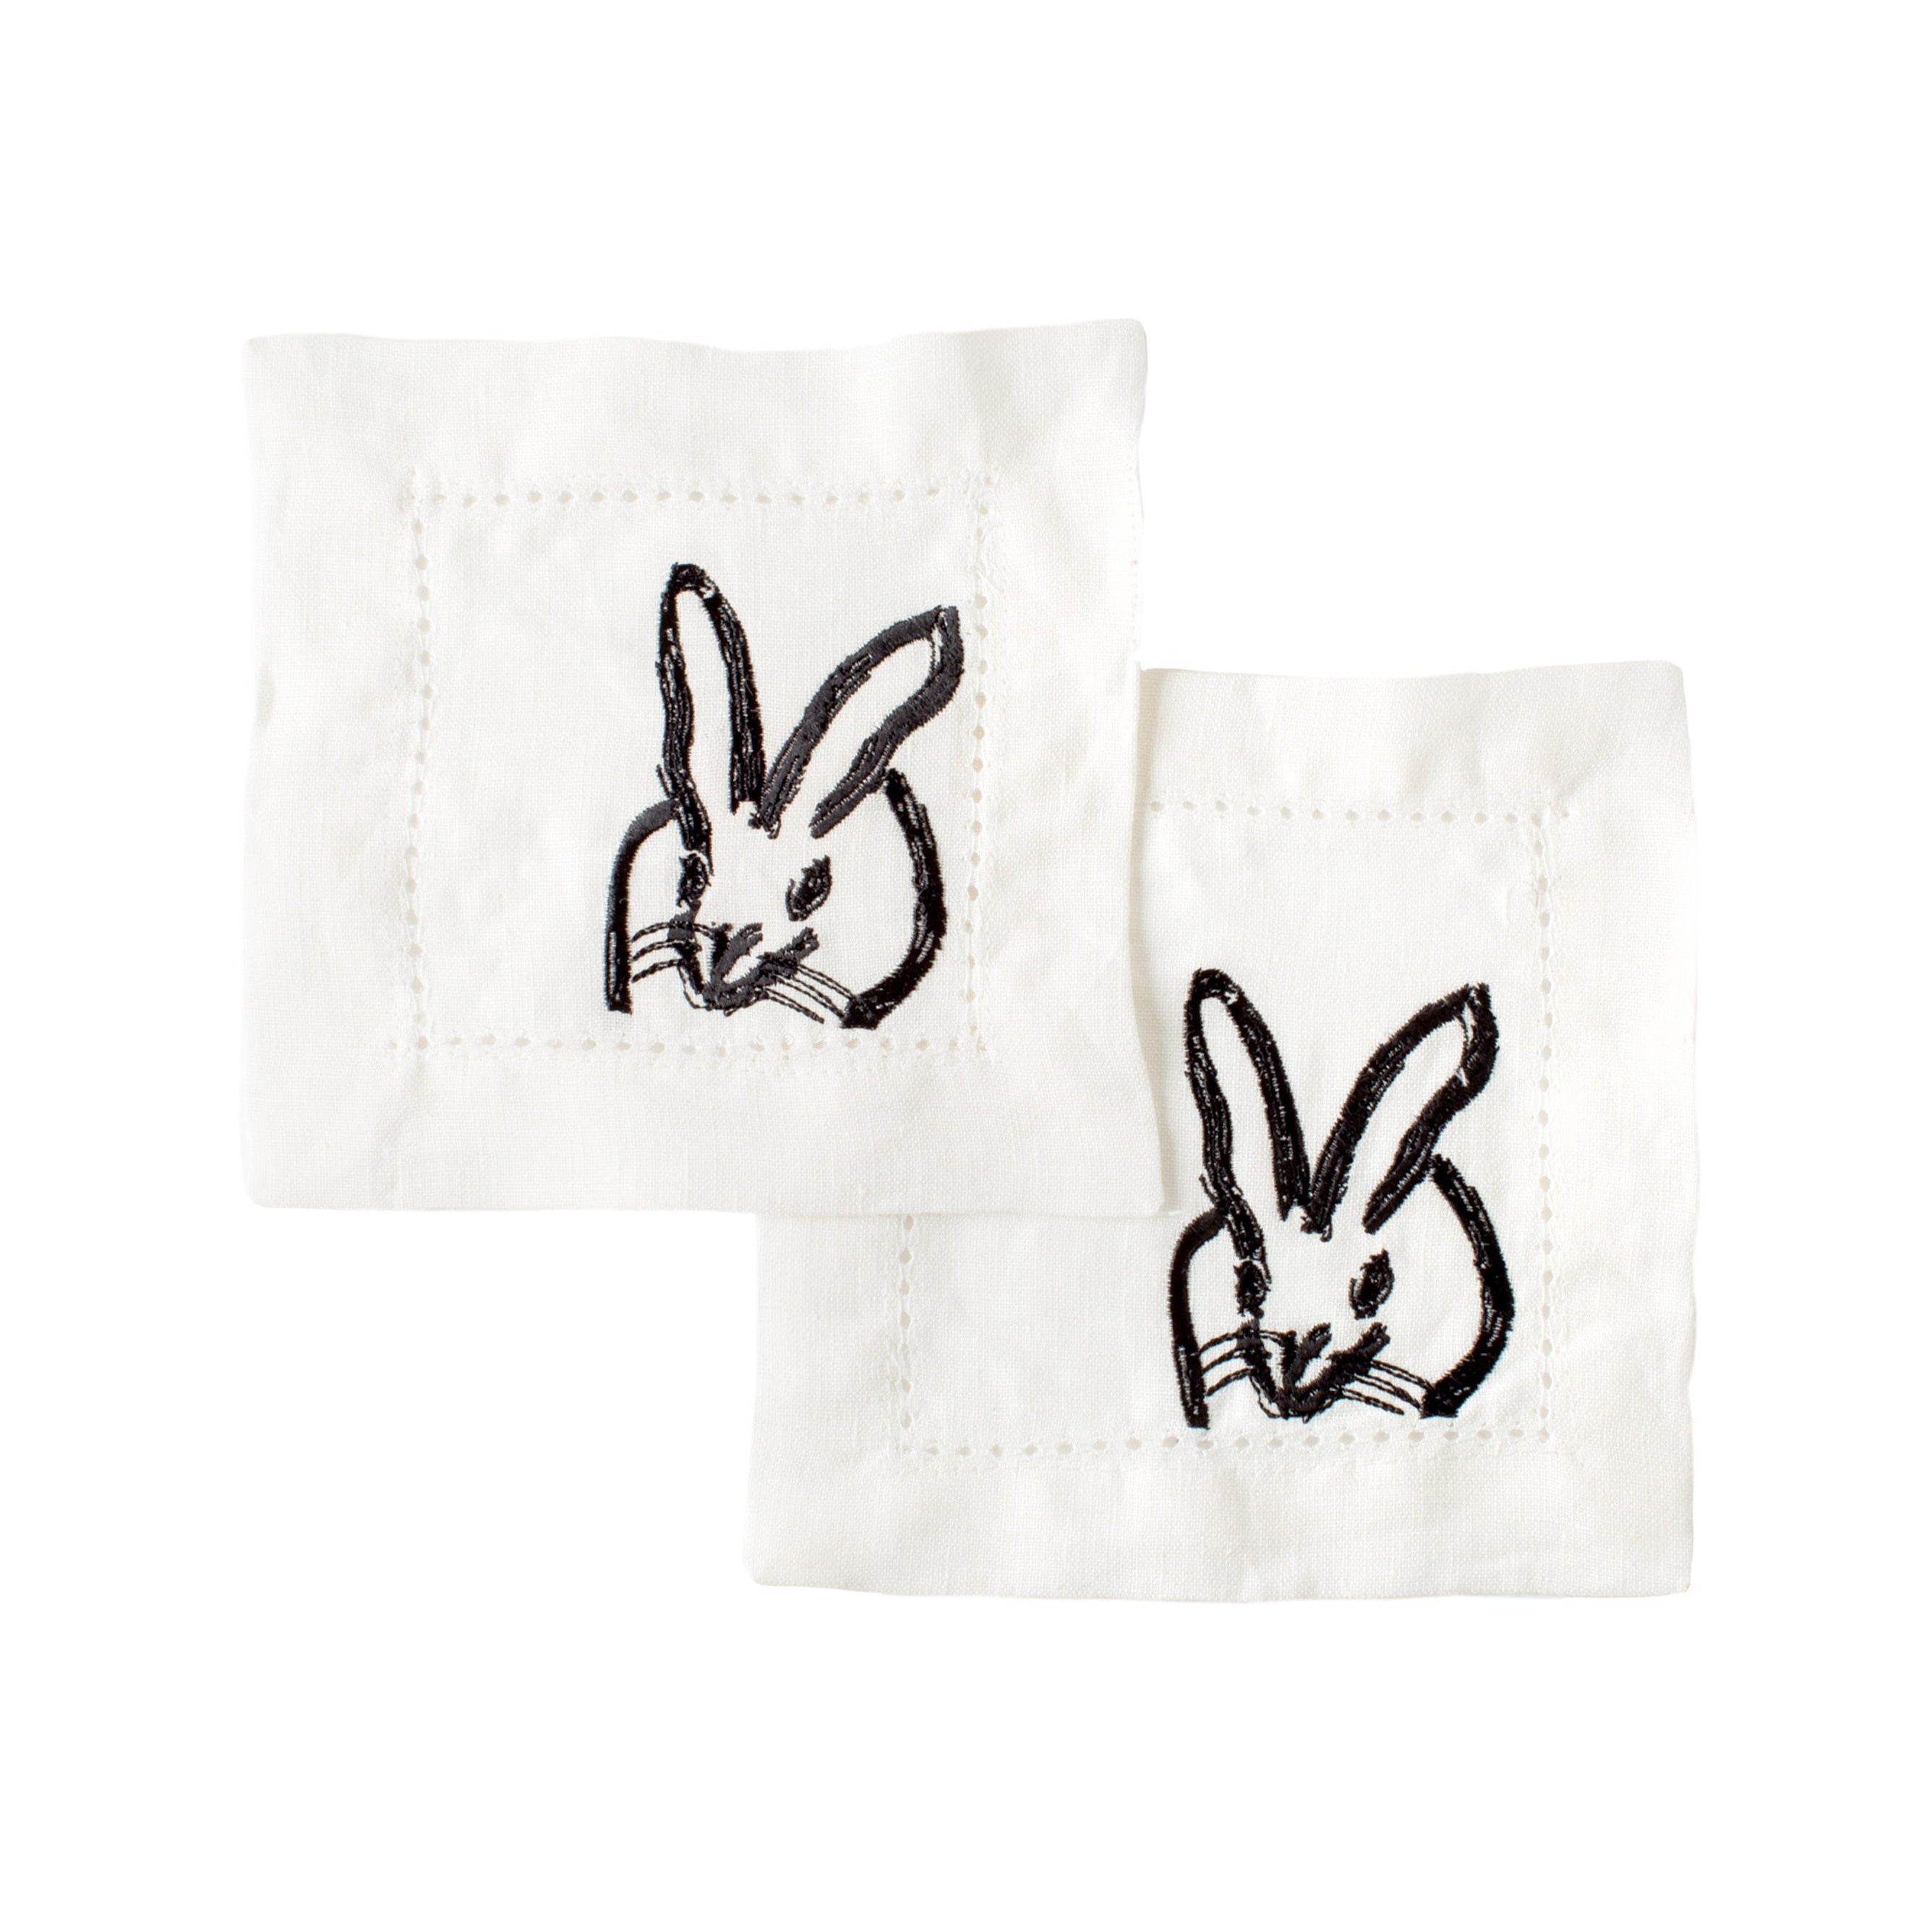 Black Bunny Embroidered Linen Cocktail Napkins in White, Set of 6